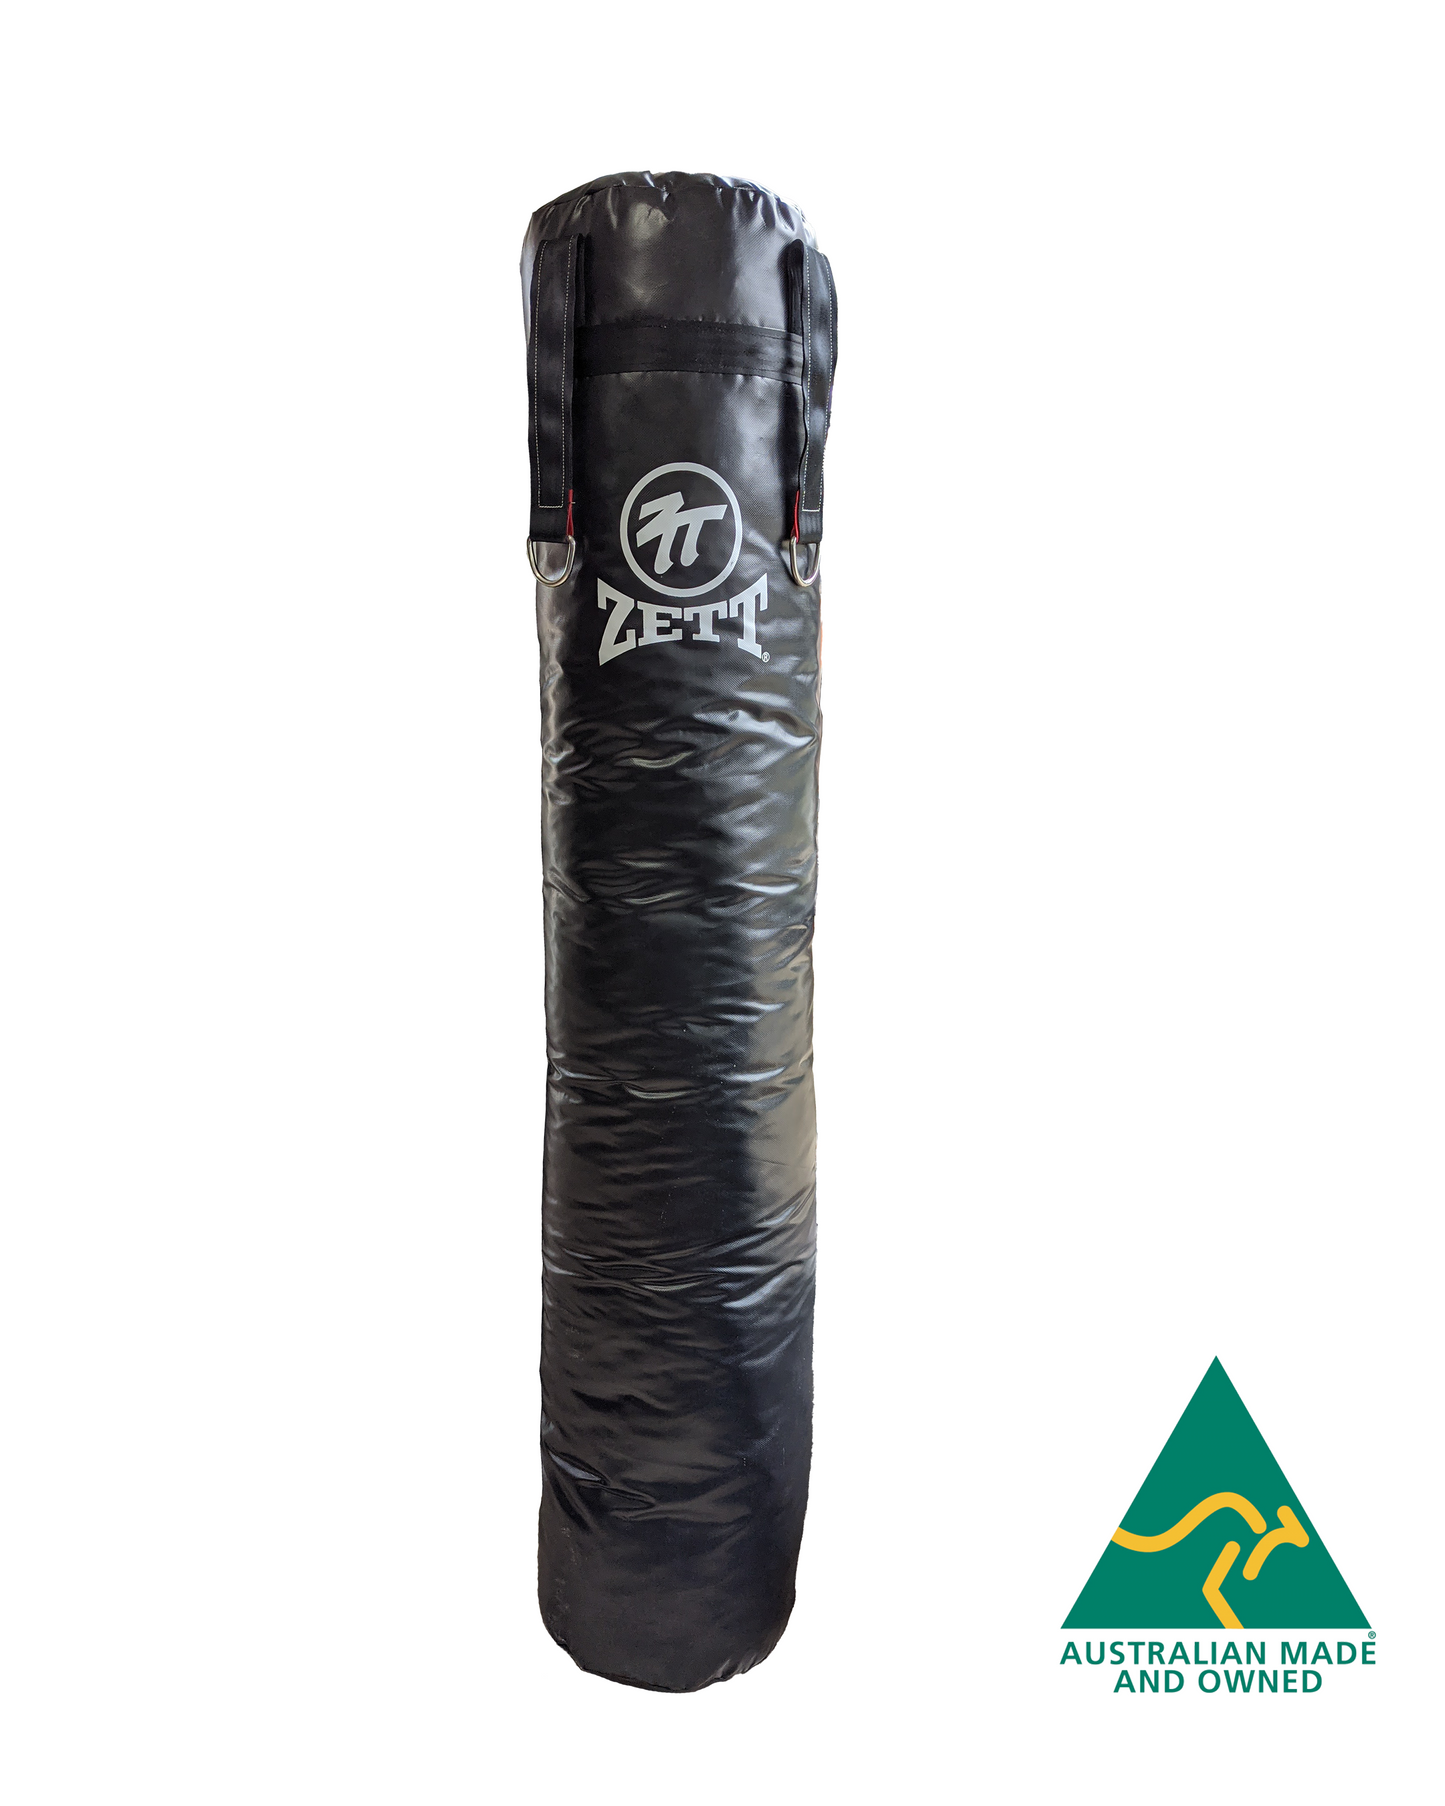 Zett Punching Bag - 4ft/5ft/6ft (for postage please contact us)